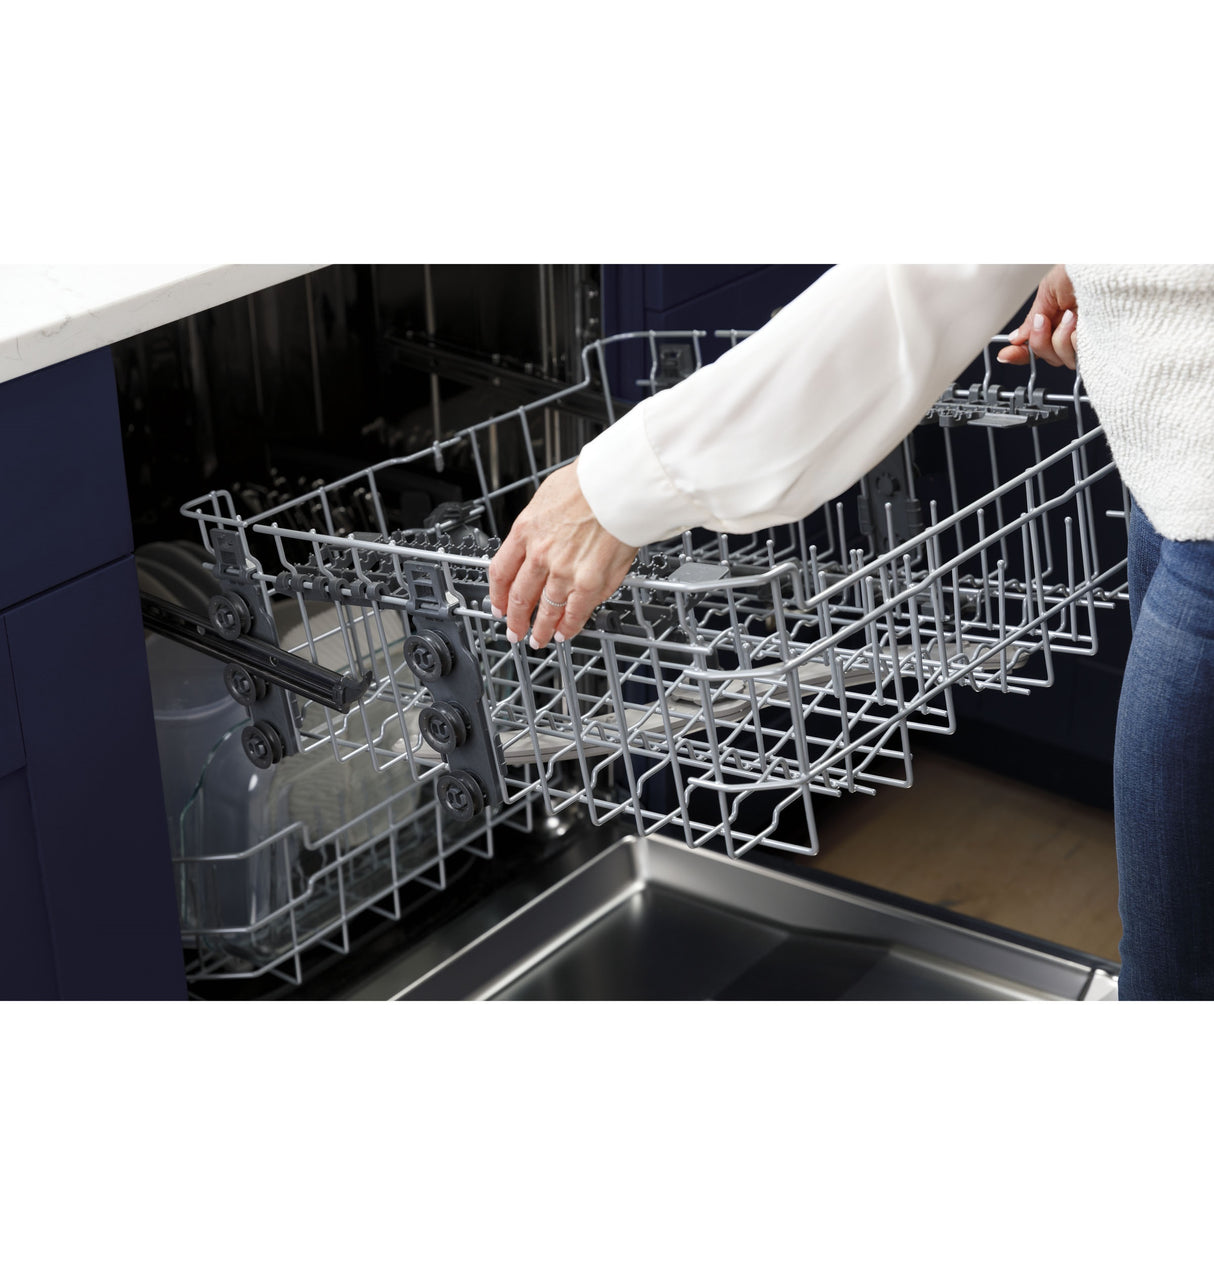 GE(R) ENERGY STAR(R) Top Control with Stainless Steel Interior Dishwasher with Sanitize Cycle & Dry Boost with Fan Assist - (GDT645SMNES)